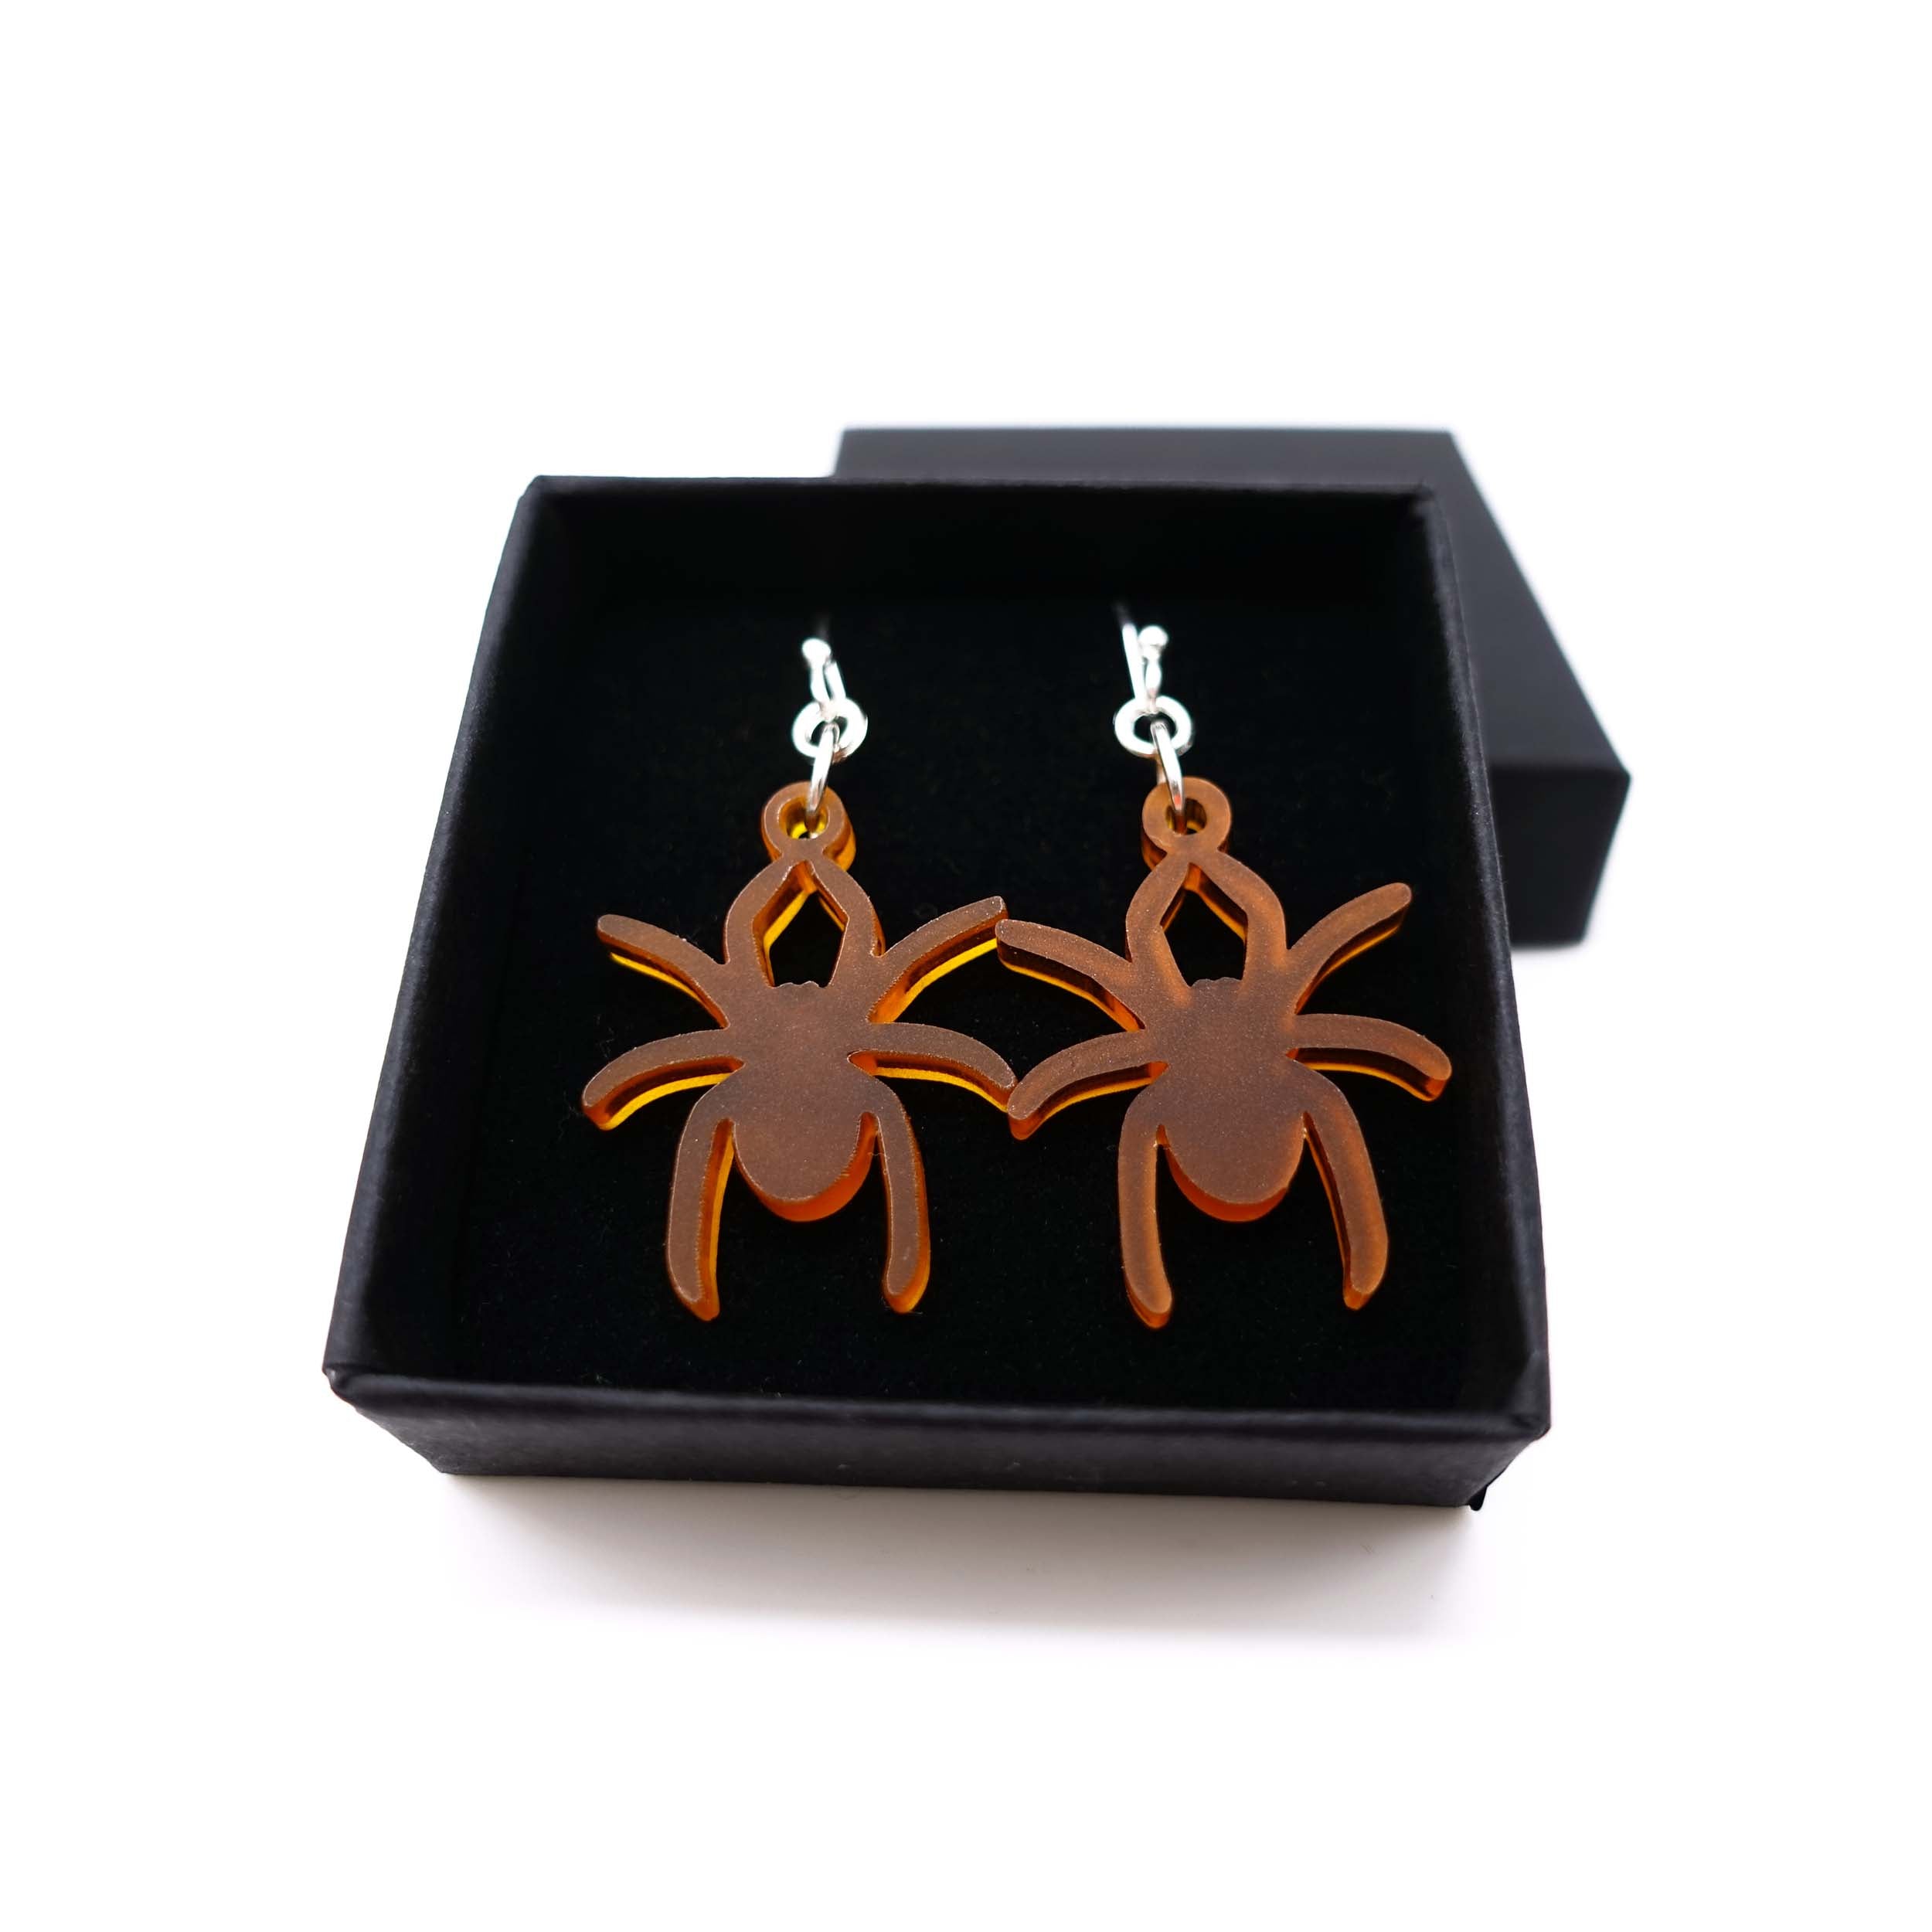 Lady Hale commemorative spider earrings in cider frost shown in box.